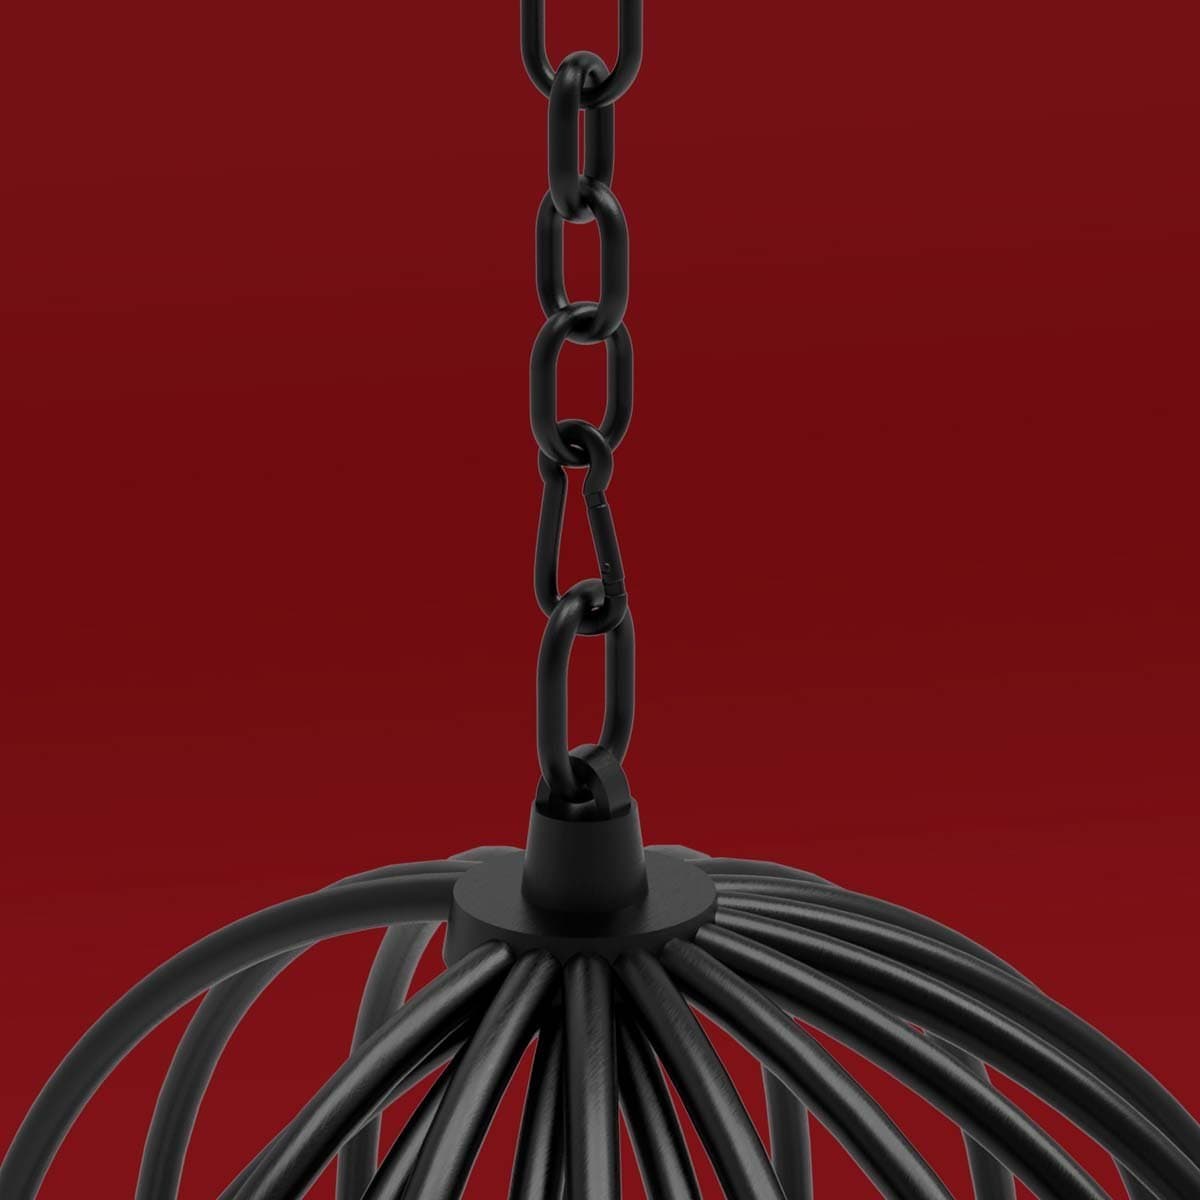 Metal Bondage Cage - Thorn & Feather